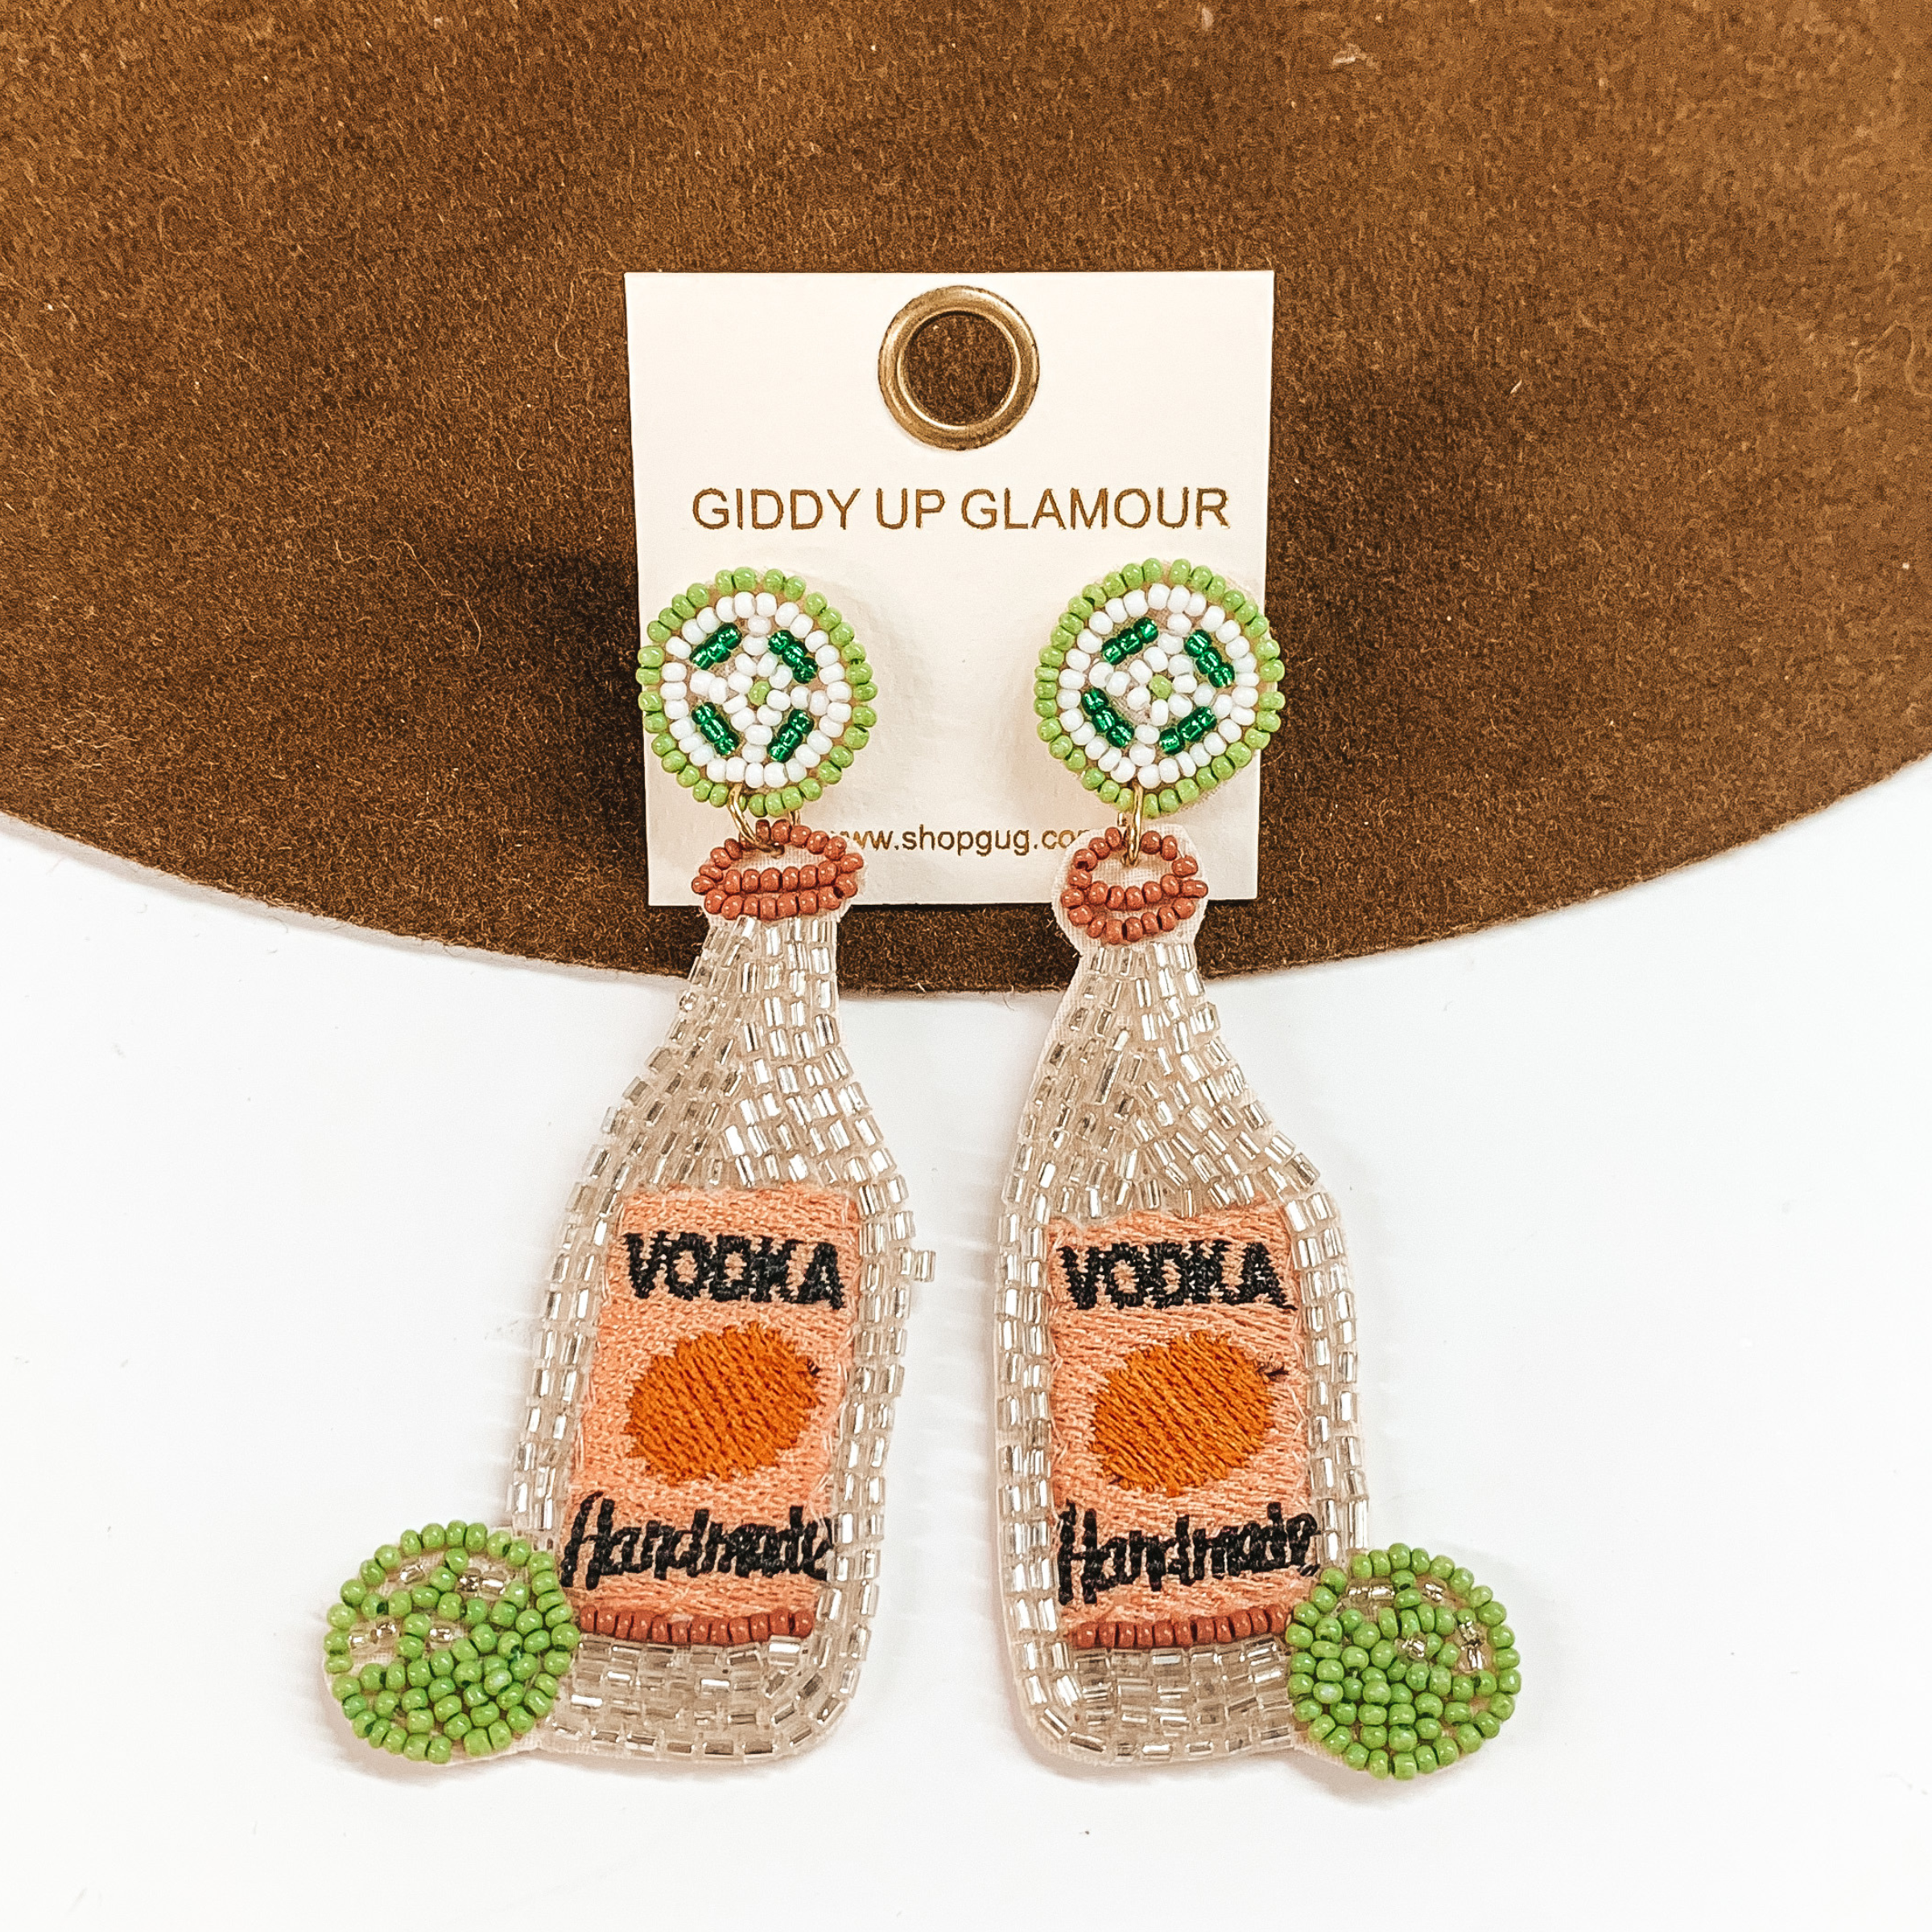 White beaded bottle earrings with lime beaded post studs. These earrings aso include a black stitching that spells out "VODKA" and "Handmade". These earrings are pictured on a white and brown background. 